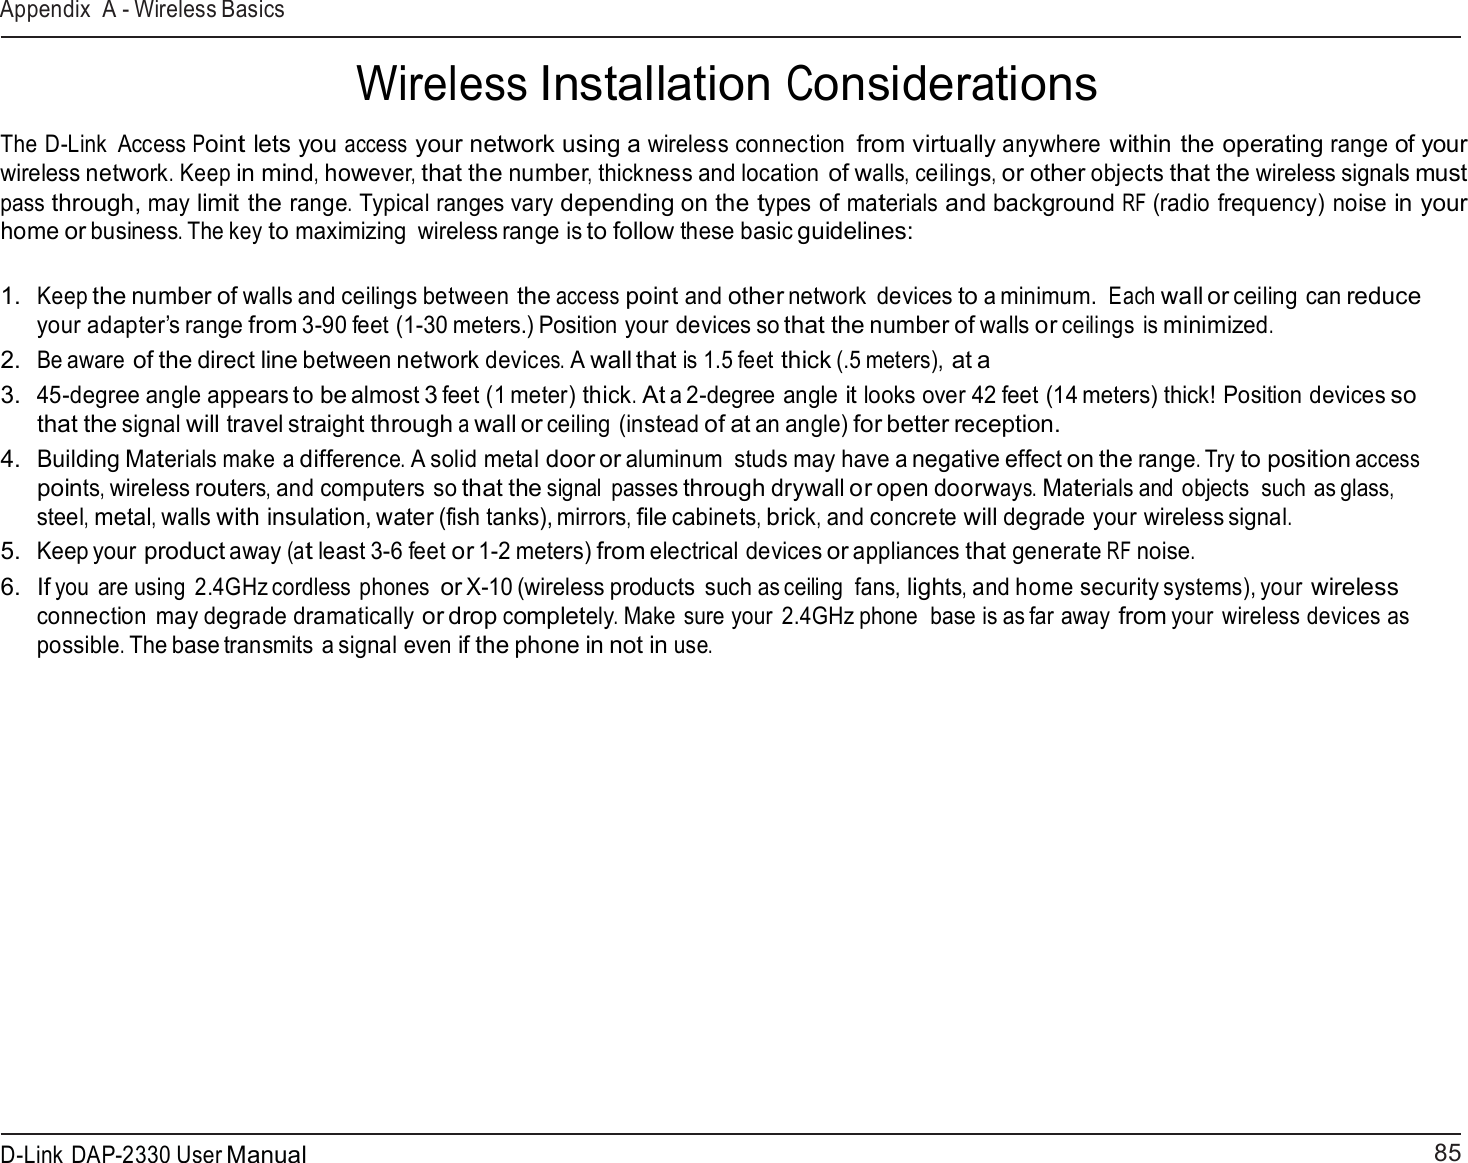 85 D-Link DAP-2330 User ManualAppendix A - Wireless Basics     Wireless Installation Considerations  The D-Link  Access Point lets you access your network using a wireless connection from virtually anywhere within the operating range of your wireless network. Keep in mind, however, that the number, thickness and location of walls, ceilings, or other objects that the wireless signals must pass through, may limit the range. Typical ranges vary depending on the types of materials and background RF (radio frequency) noise in your home or business. The key to maximizing  wireless range is to follow these basic guidelines:   1.  Keep the number of walls and ceilings between the access point and other network  devices to a minimum. Each wall or ceiling can reduce your adapter’s range from 3-90 feet (1-30 meters.) Position your devices so that the number of walls or ceilings is minimized. 2.  Be aware of the direct line between network devices. A wall that is 1.5 feet thick (.5 meters), at a 3.  45-degree angle appears to be almost 3 feet (1 meter) thick. At a 2-degree angle it looks over 42 feet (14 meters) thick! Position devices so that the signal will travel straight through a wall or ceiling (instead of at an angle) for better reception. 4.  Building Materials make a difference. A solid metal door or aluminum  studs may have a negative effect on the range. Try to position access points, wireless routers, and computers so that the signal  passes through drywall or open doorways. Materials and objects  such as glass, steel, metal, walls with insulation, water (fish tanks), mirrors, file cabinets, brick, and concrete will degrade your wireless signal. 5.  Keep your product away (at least 3-6 feet or 1-2 meters) from electrical devices or appliances that generate RF noise. 6.  If you  are using  2.4GHz cordless phones or X-10 (wireless products  such as ceiling  fans, lights, and home security systems), your wireless connection may degrade dramatically or drop completely. Make  sure your  2.4GHz phone  base is as far away from your wireless devices as possible. The base transmits a signal even if the phone in not in use. 